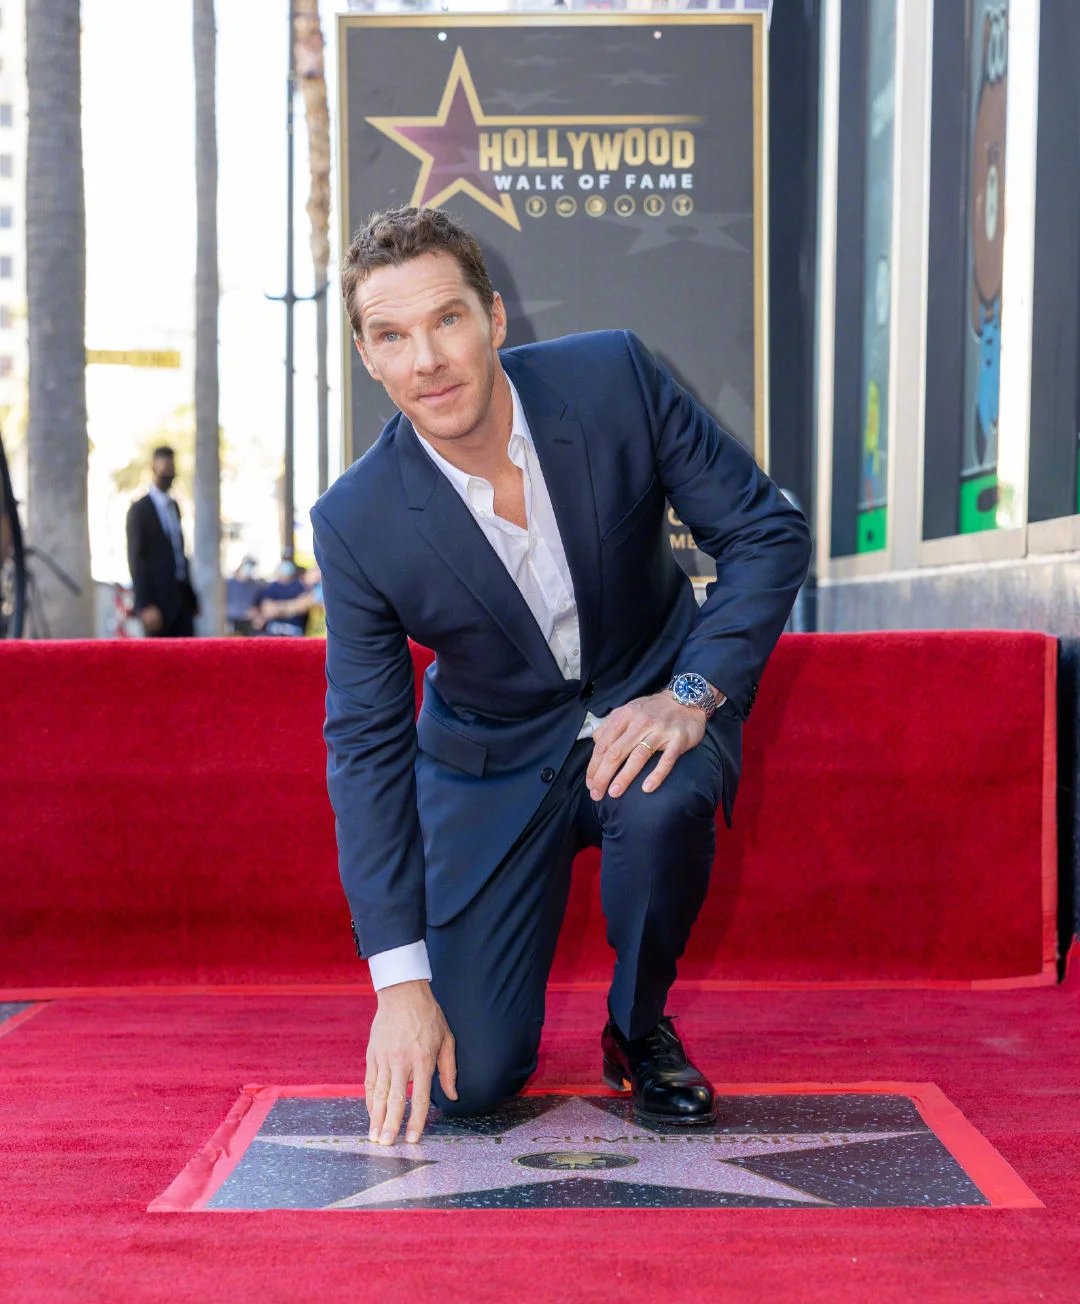 benedict-cumberbatch-leaves-a-star-that-belongs-to-him-at-walk-of-fame-1